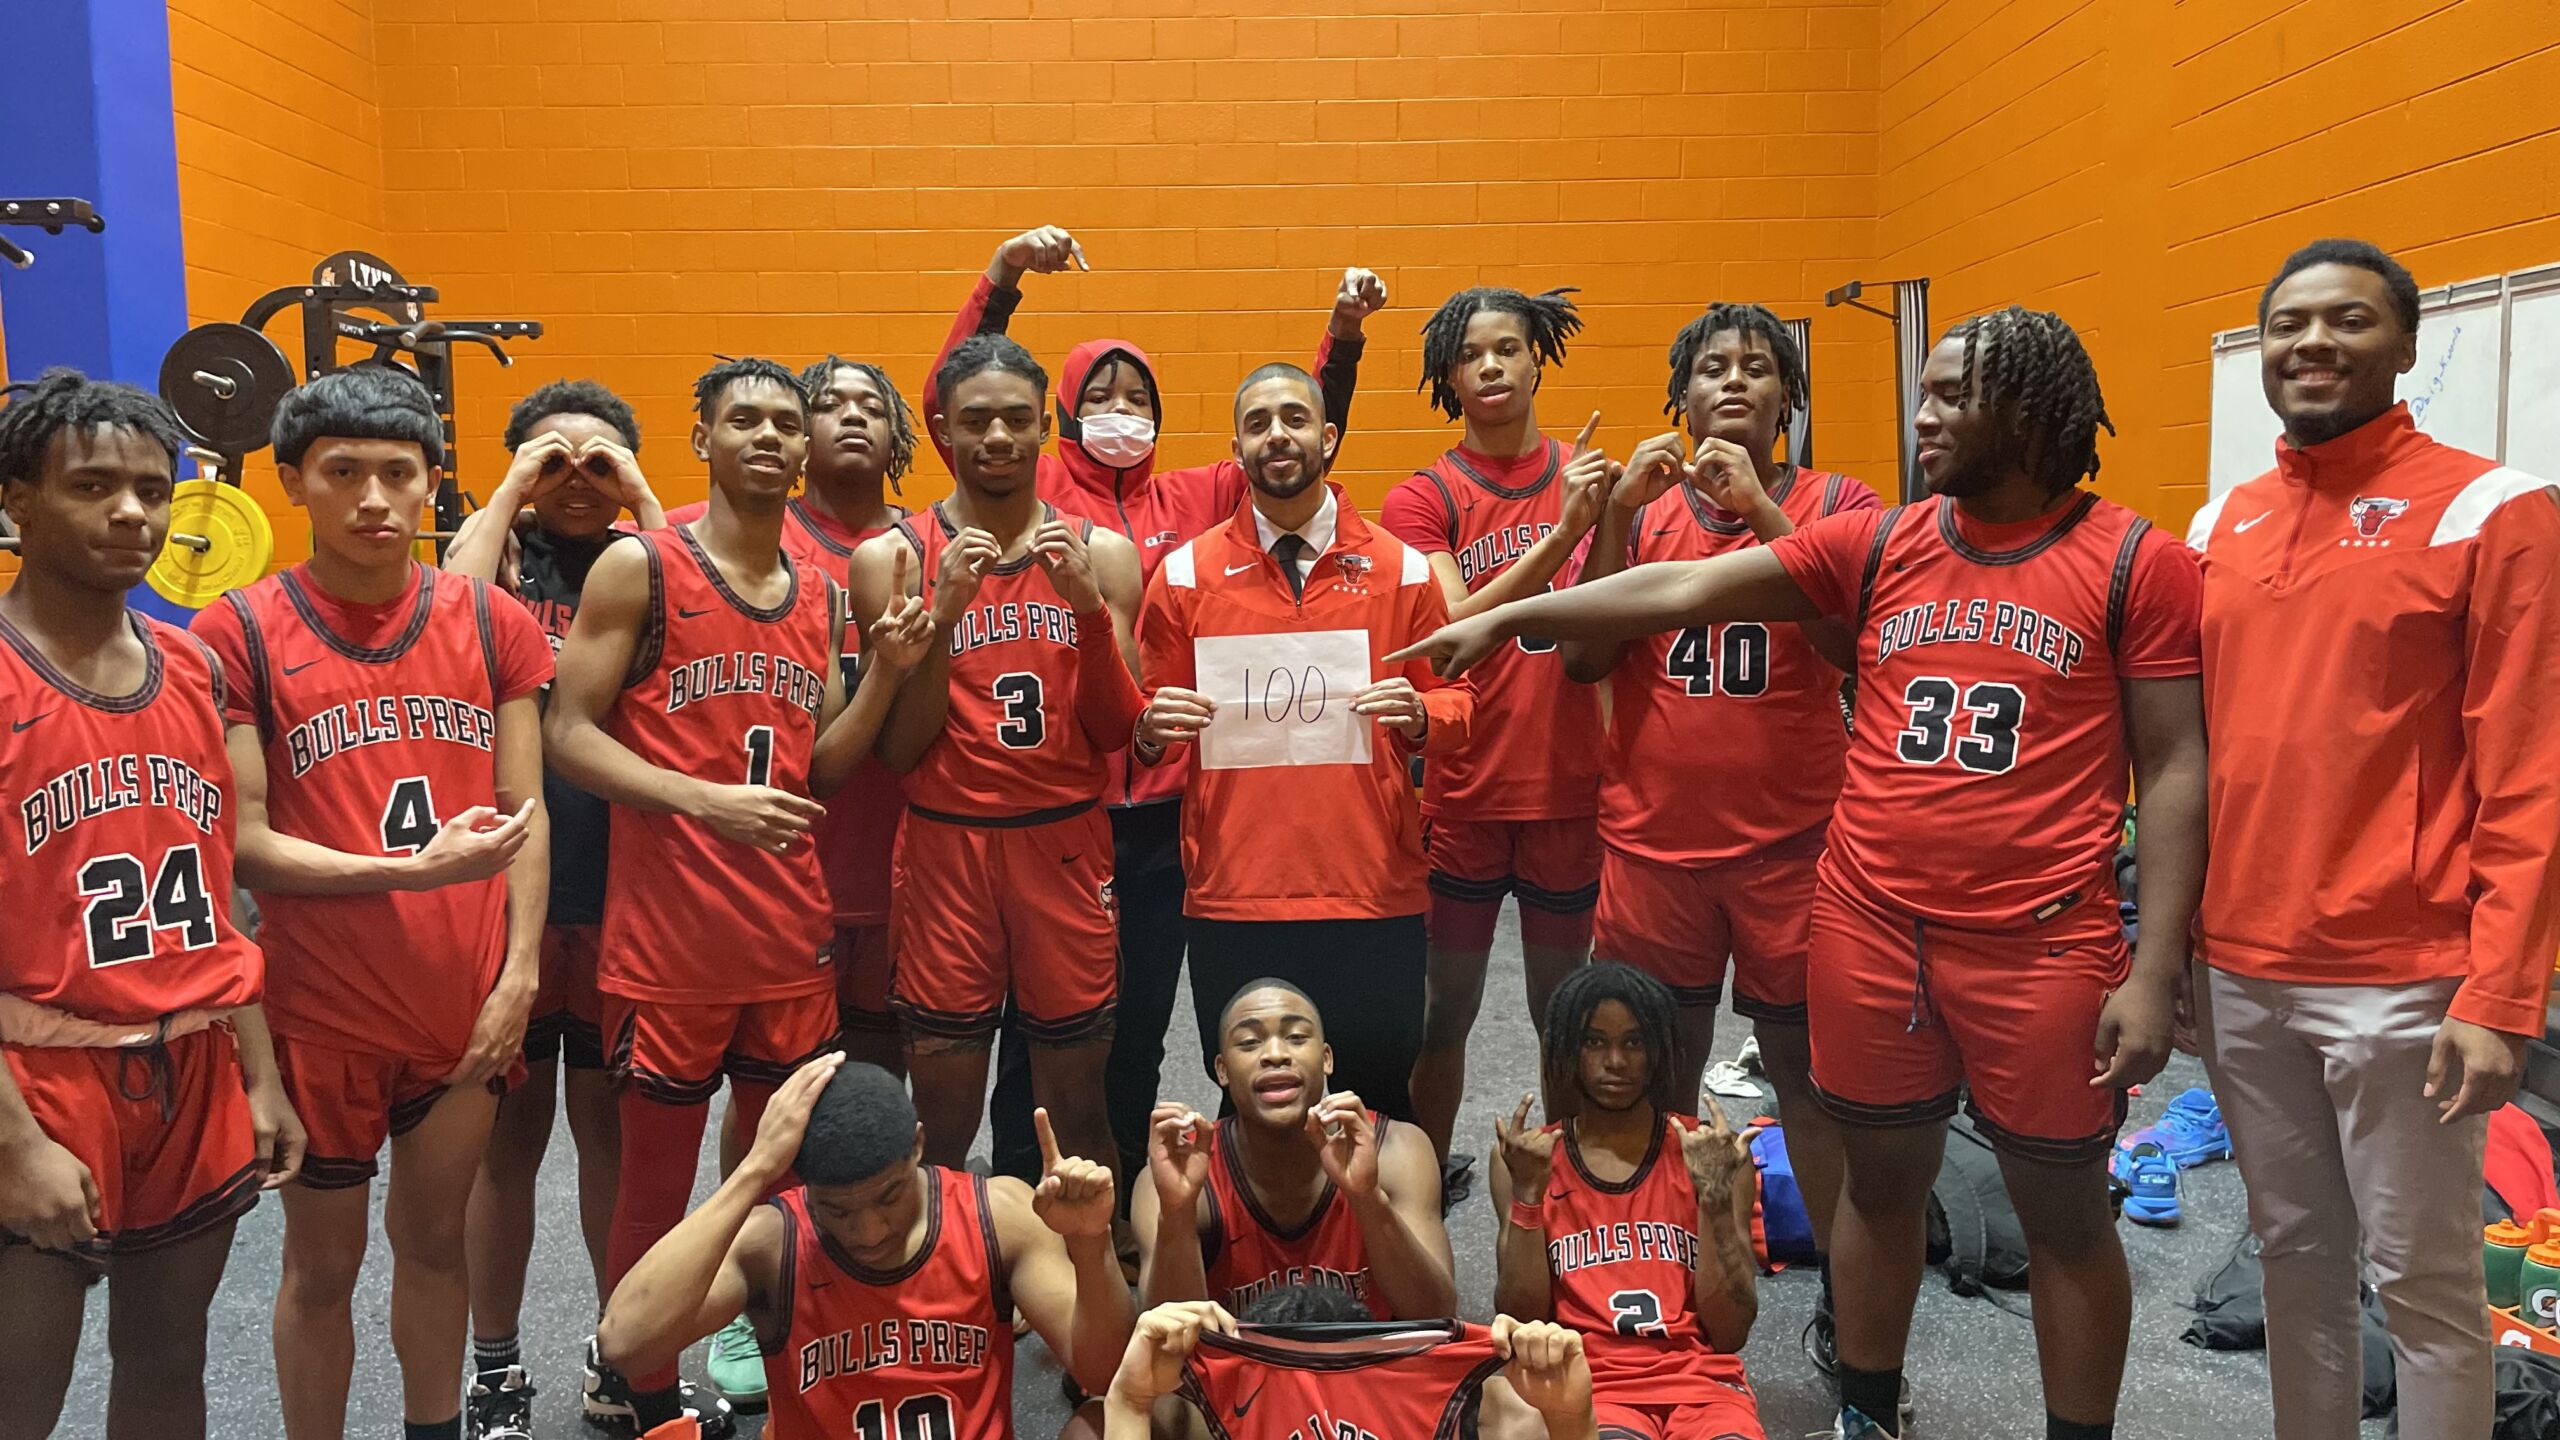 Chicago Bulls College Prep basketball students pose with Mr. Goldestein as they wear their red basketball gear. The students point to the sign Mr. Goldestein is holding that says "100" indicating their 100th win.